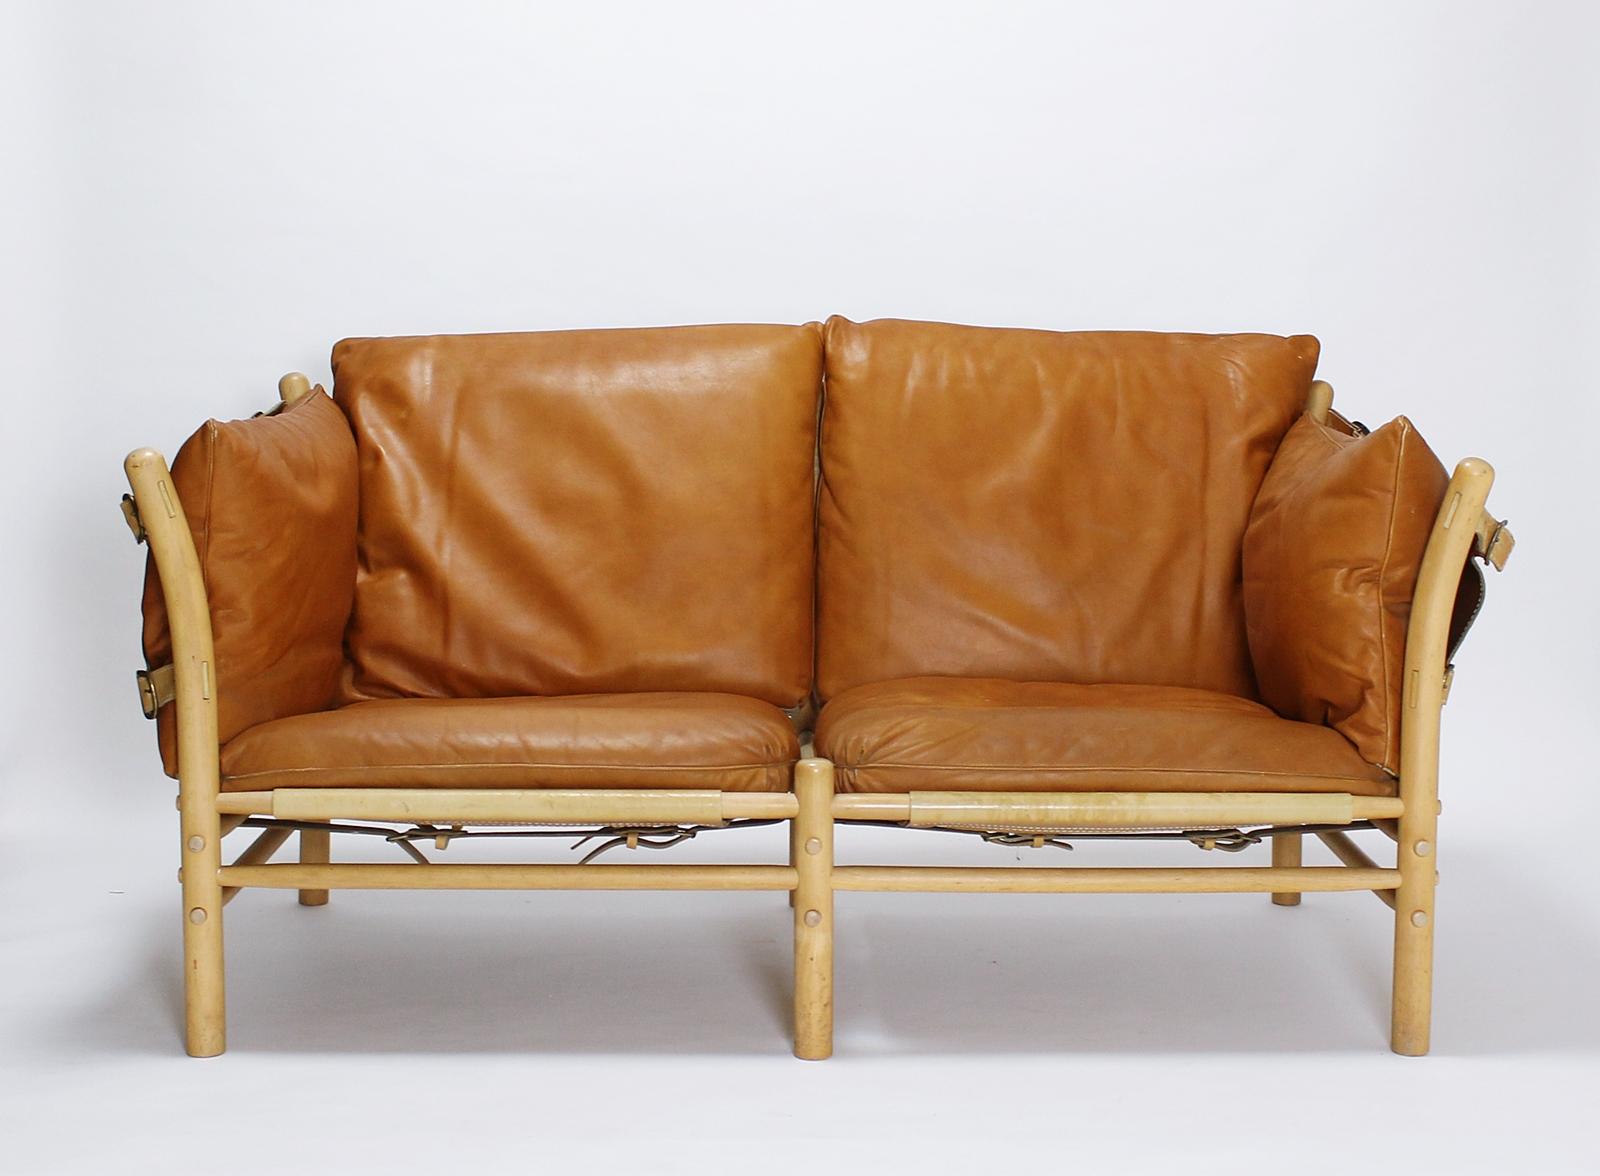 Arne Norell' s design Ilona two-seat sofa The frame is solid and turned ash, held together by a strong leather support, featuring fiber padded cushions with removable mid-brown leather upholstery.
In good original vintage condition with minor